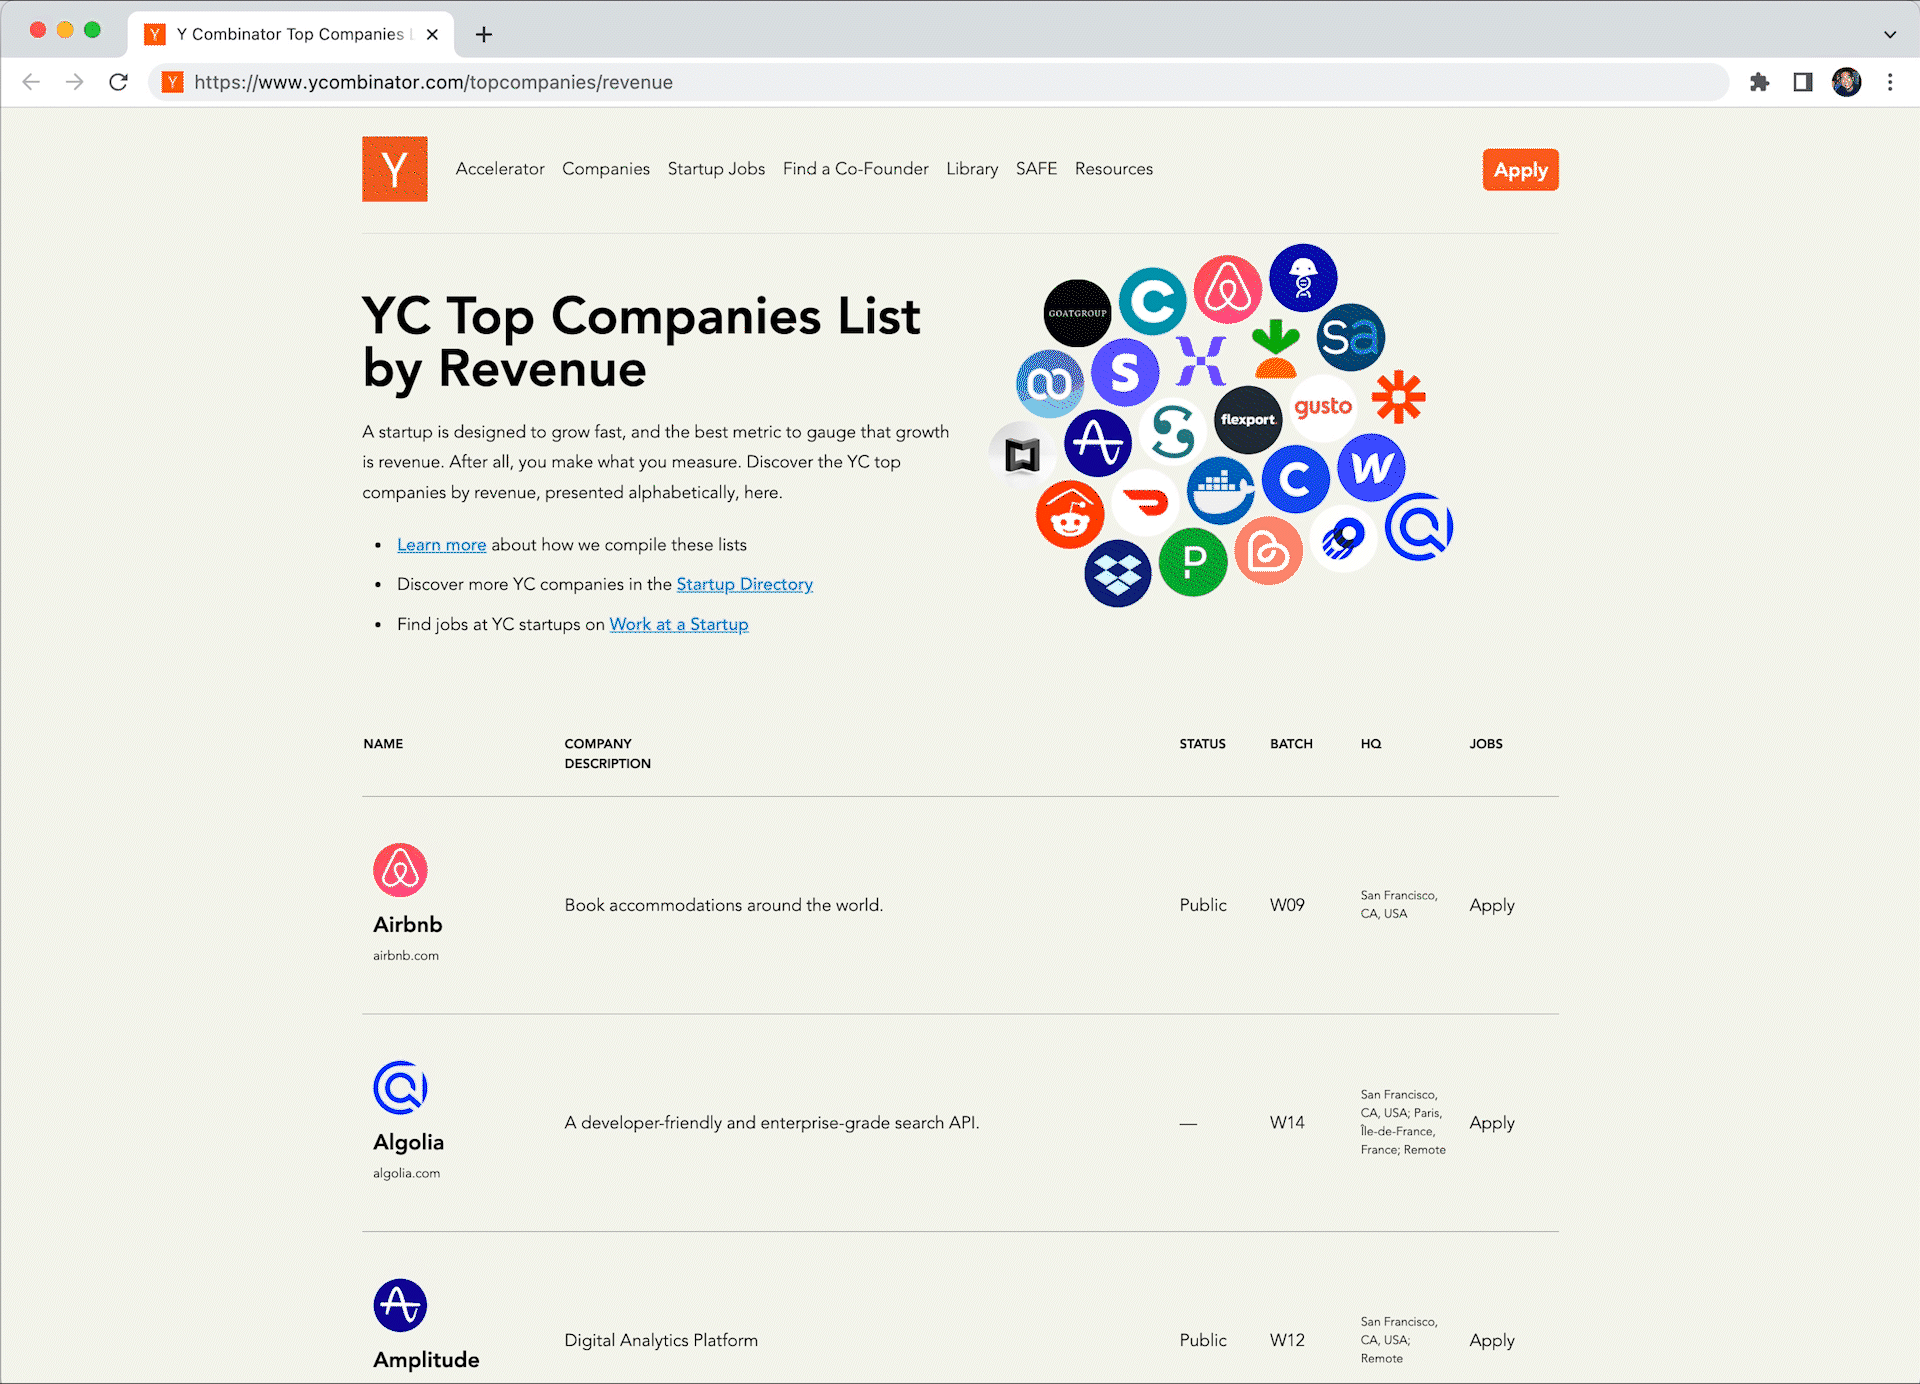 A scrolling preview of the YC Top Companies List by Revenue